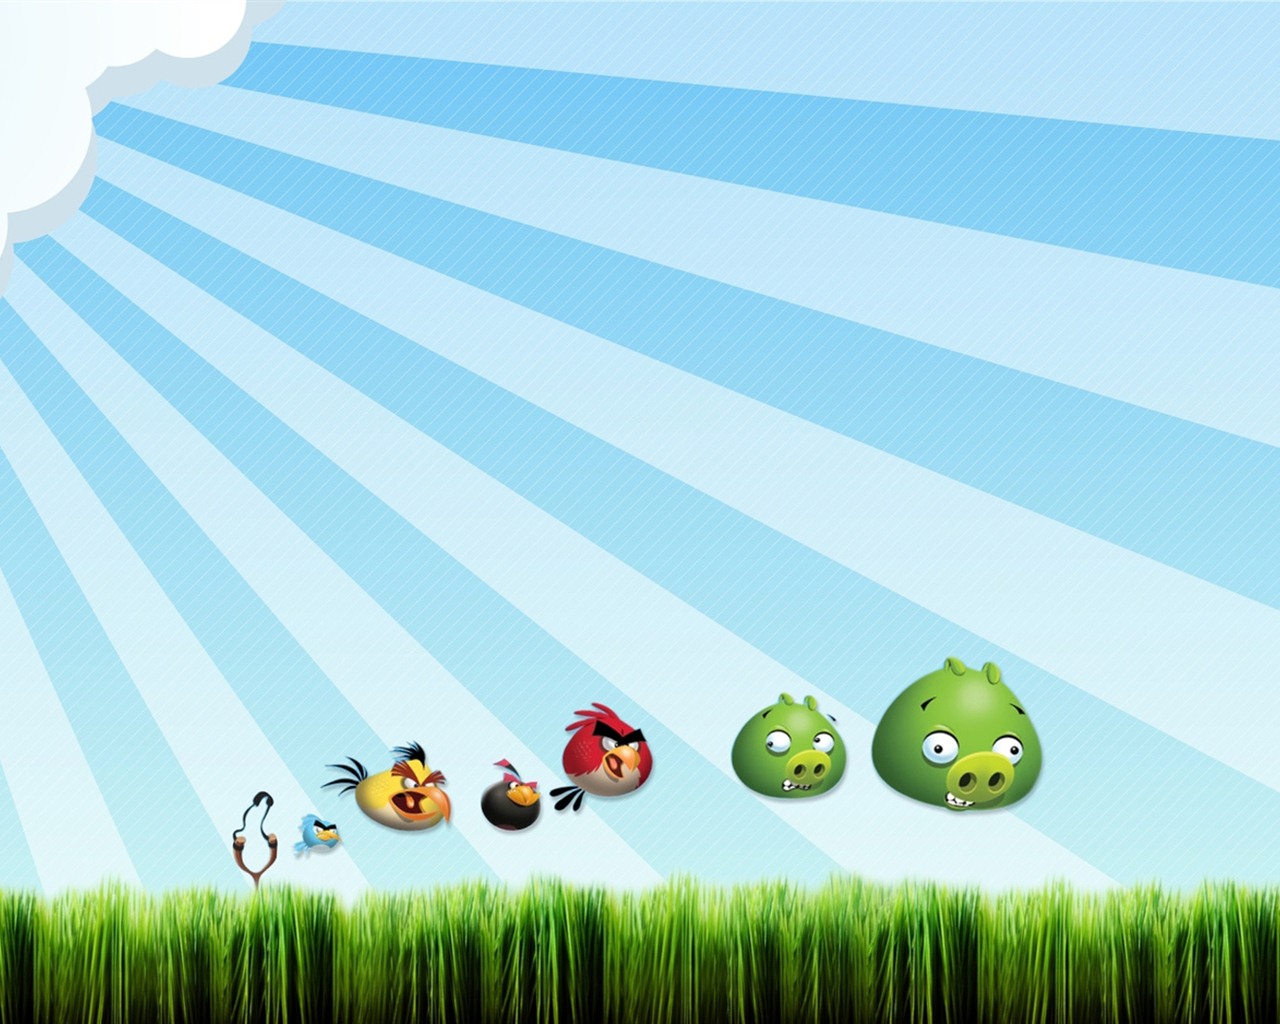 Angry Birds Game Wallpapers #4 - 1280x1024